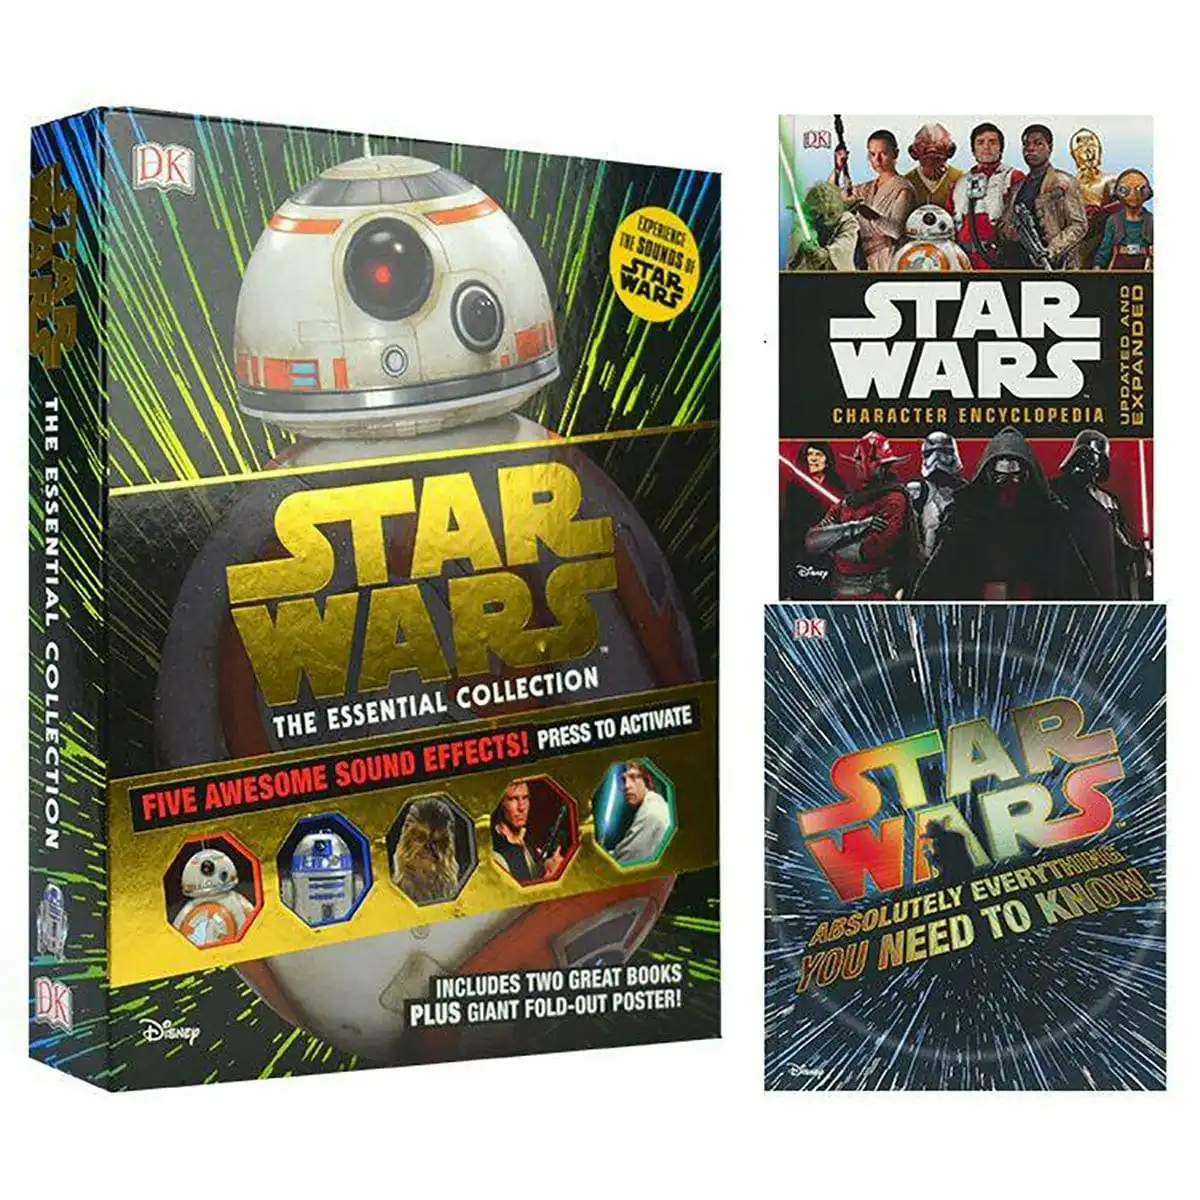 Star Wars: The Essential Collection - 2 Copy Box Set